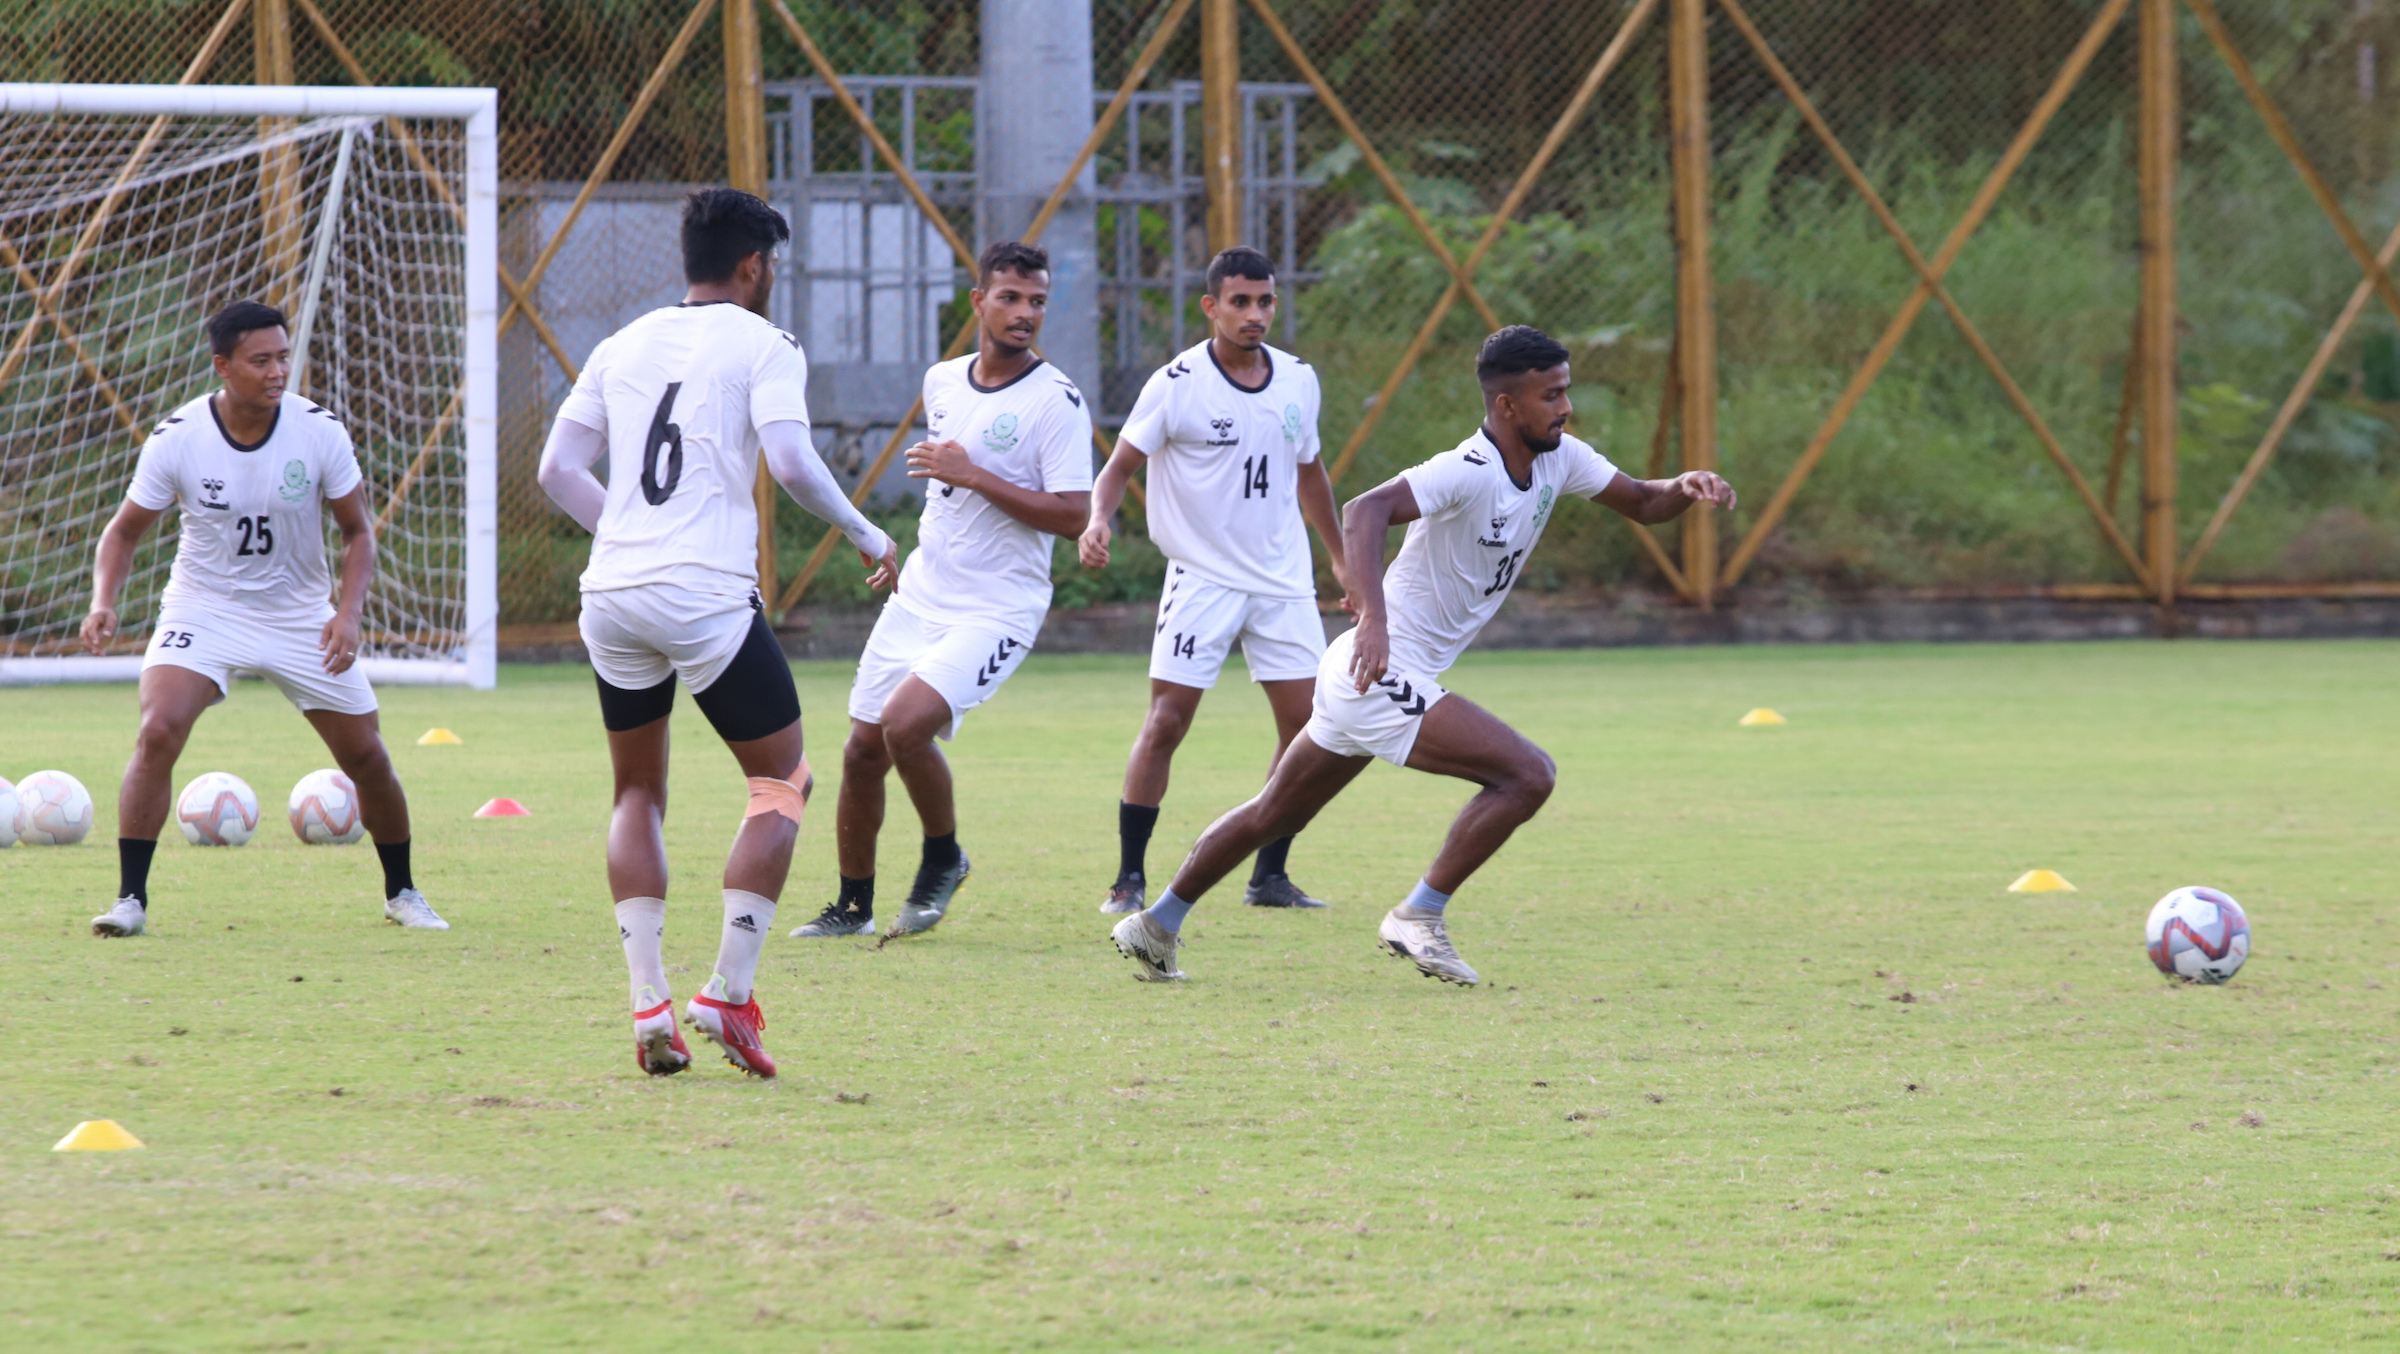 2021 Durand Cup | Mohammedan Sporting favourites to pip Bengaluru United in front of strong local support